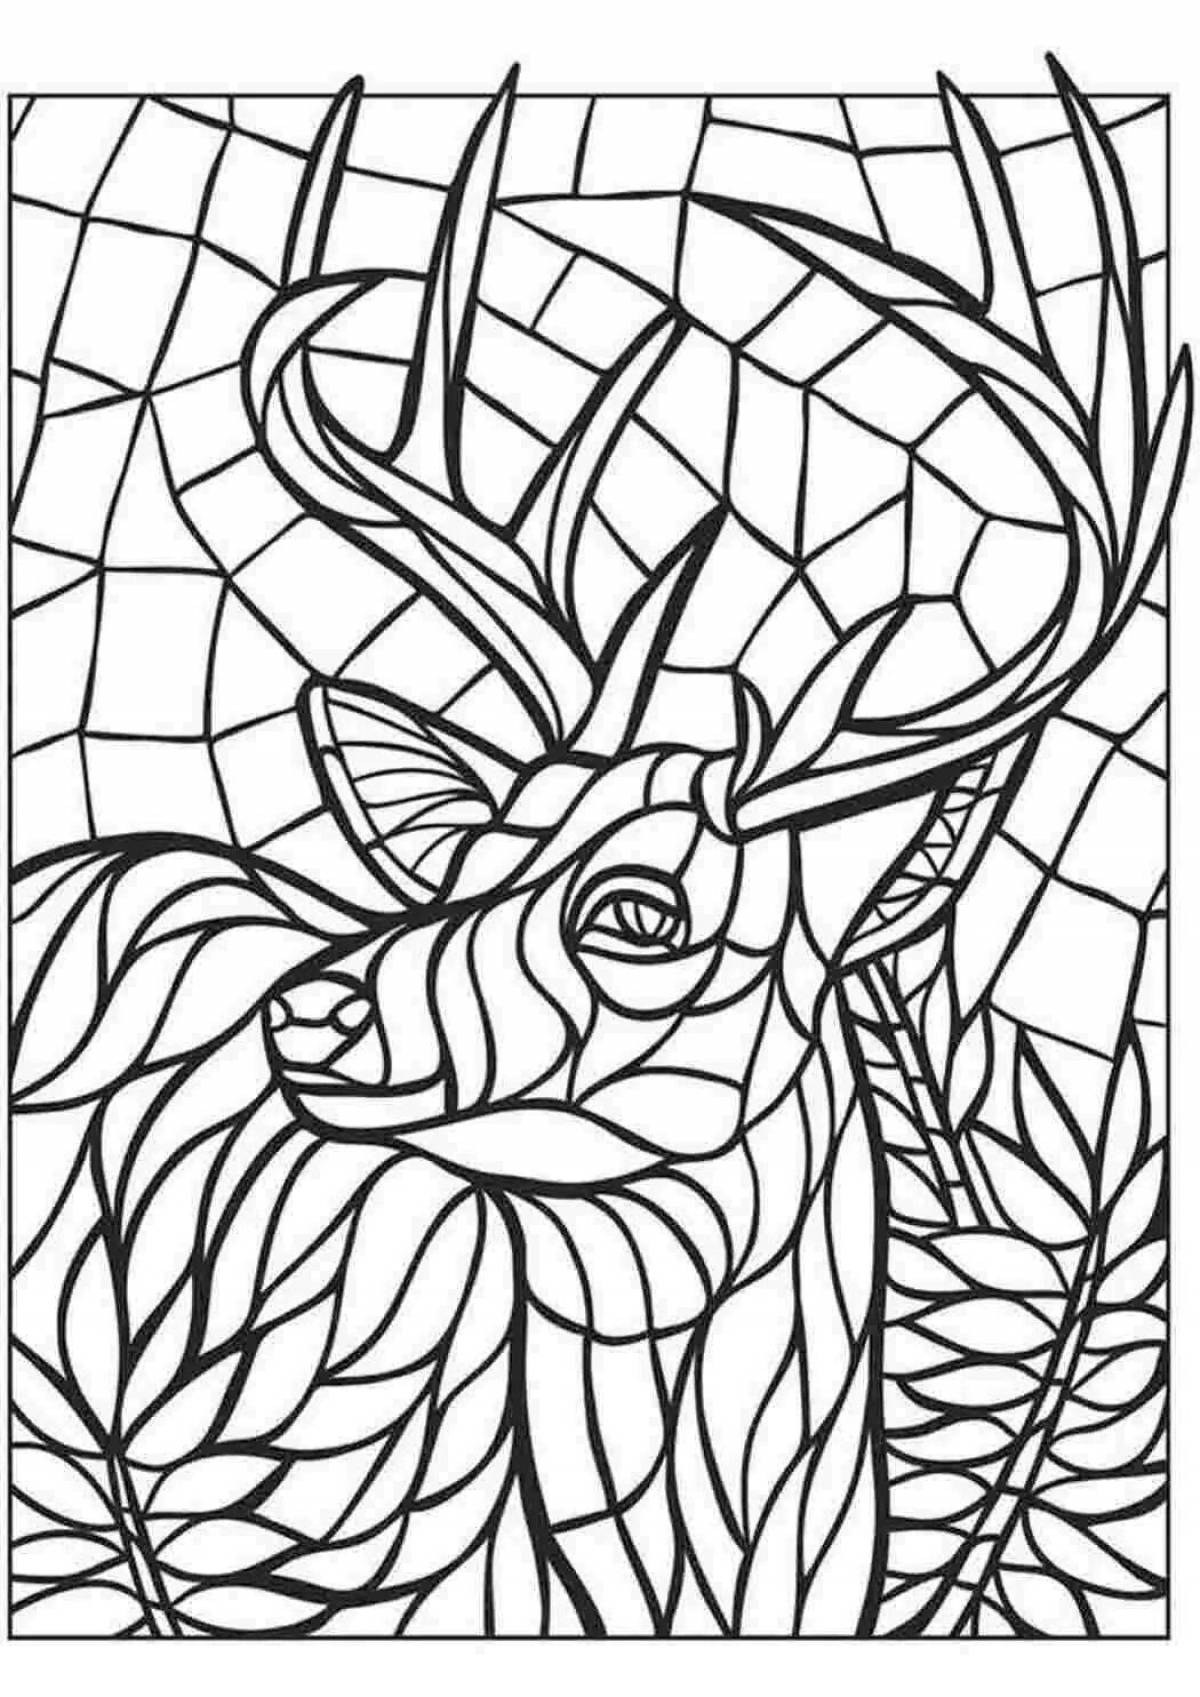 Adorable stained glass coloring book for preschoolers